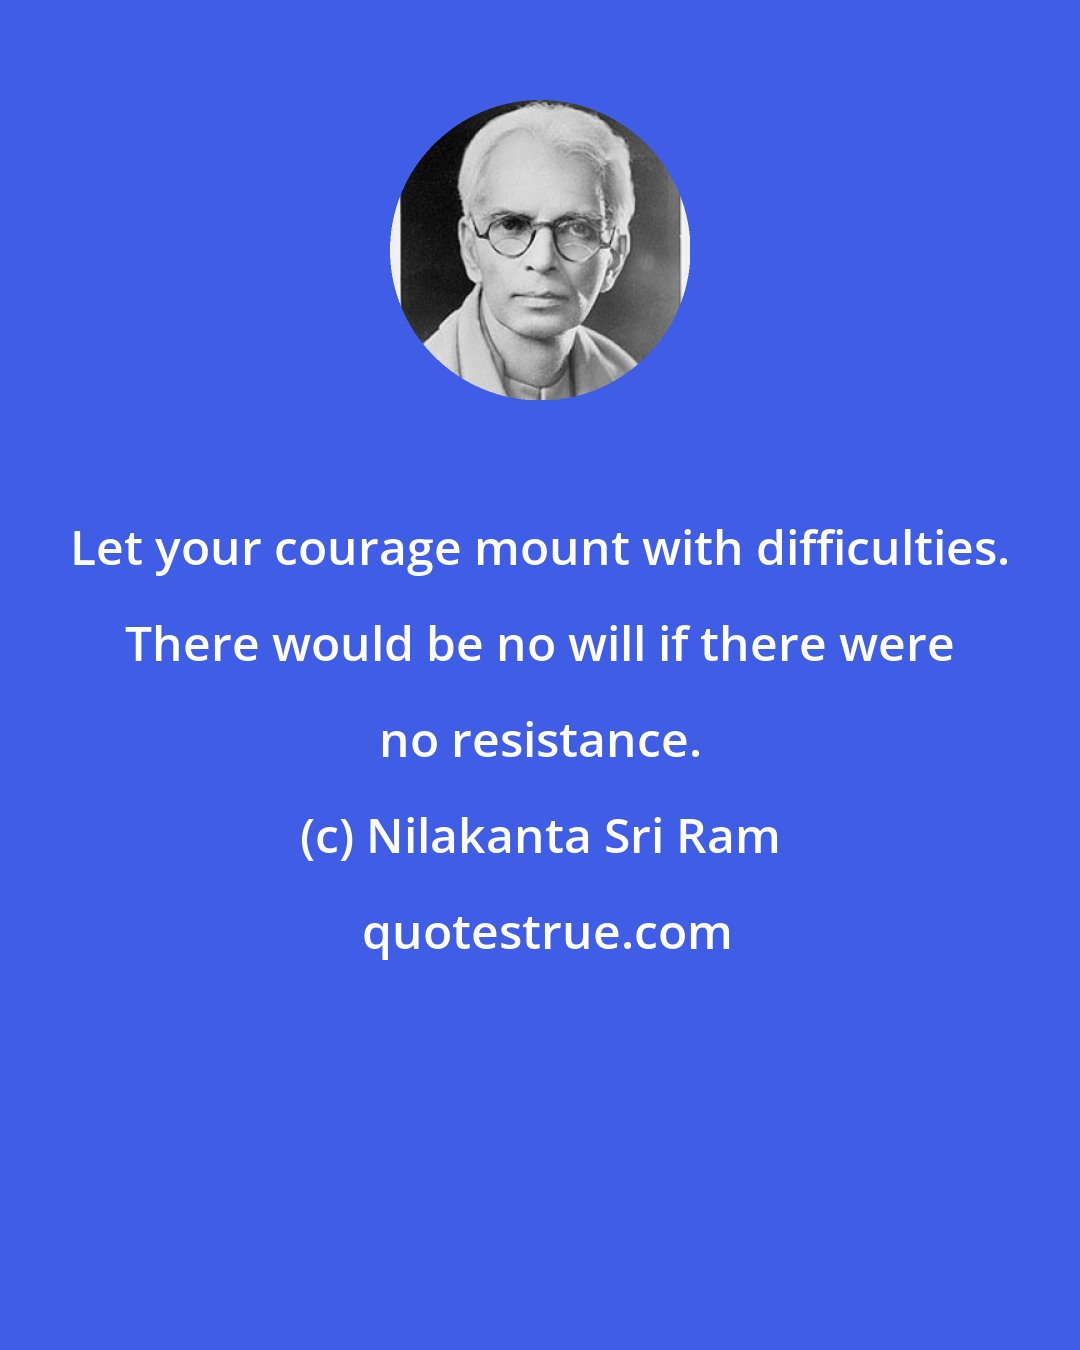 Nilakanta Sri Ram: Let your courage mount with difficulties. There would be no will if there were no resistance.